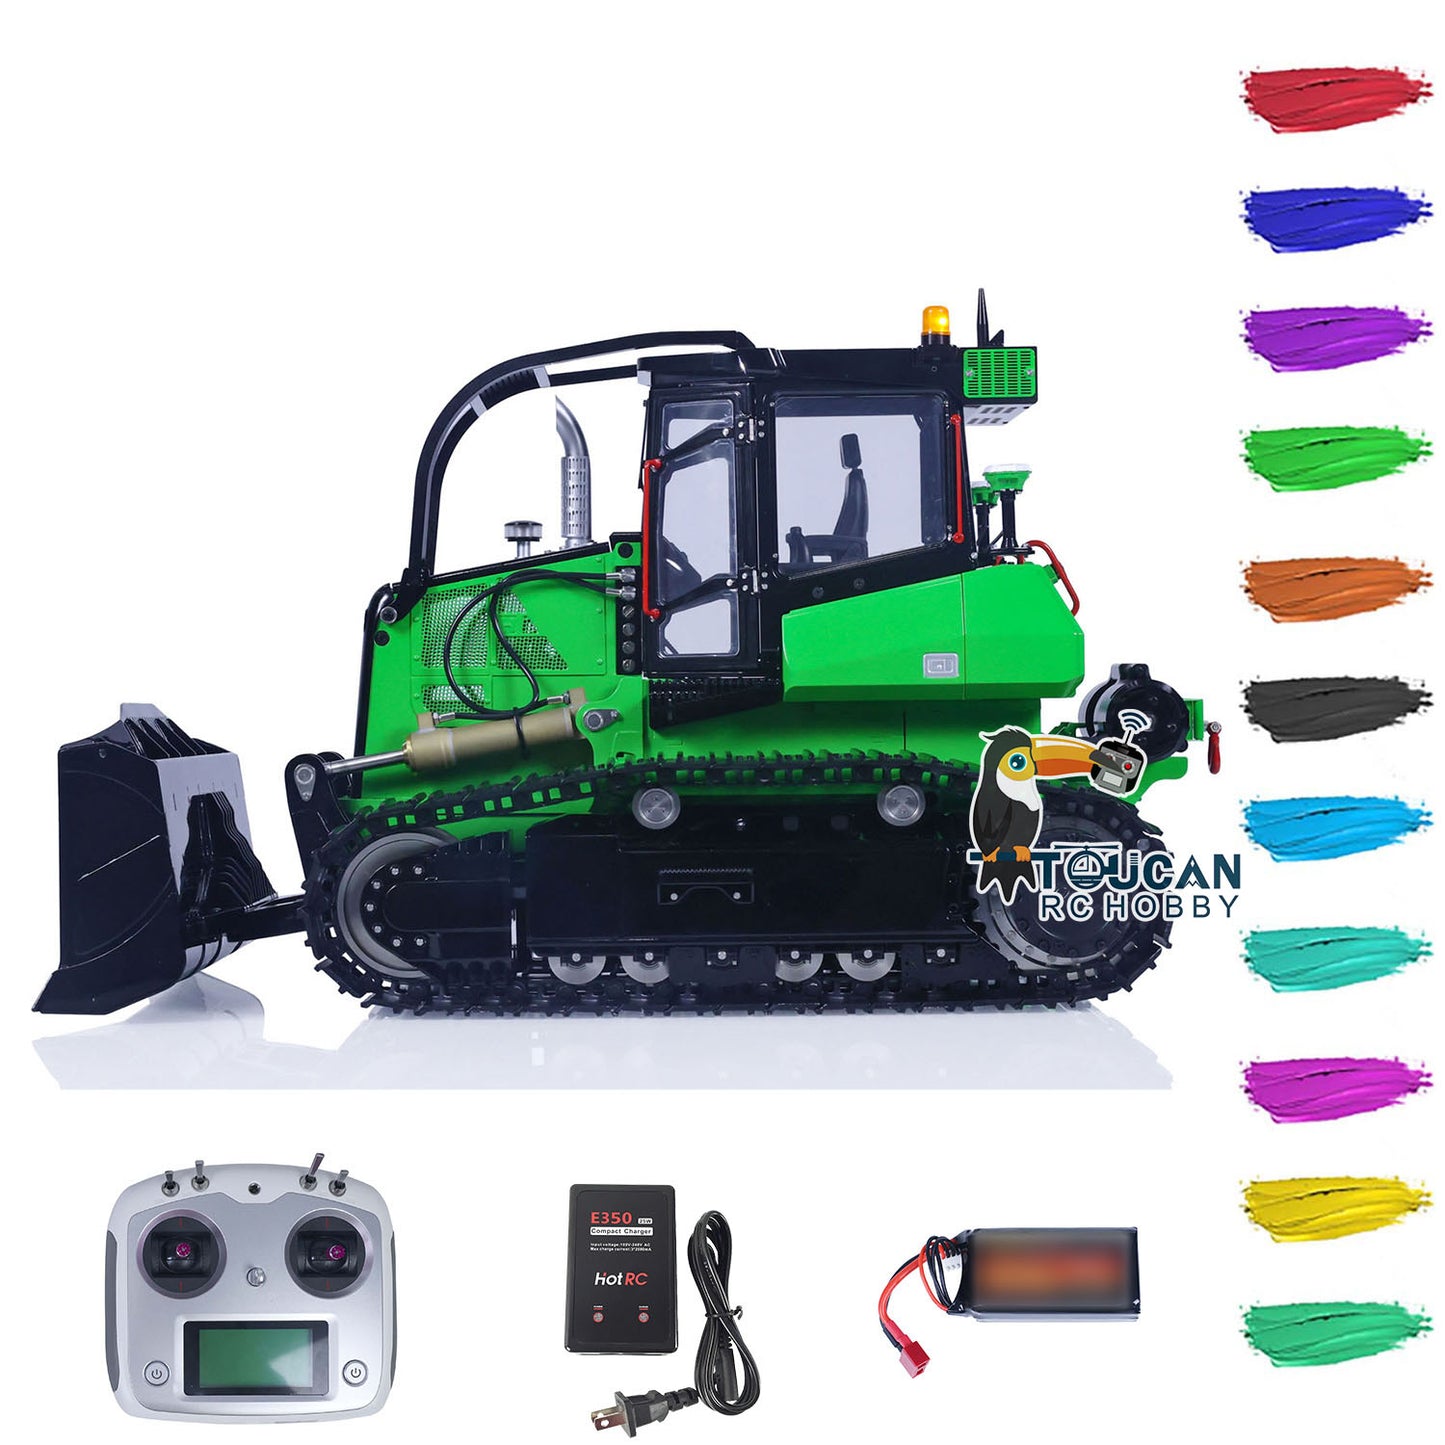 LESU Aoue 850K 1/14 RC Hydraulic Dozer Metal Remote Controlled Bulldozer Painted Assembled Hobby Model Emulated Vehicle